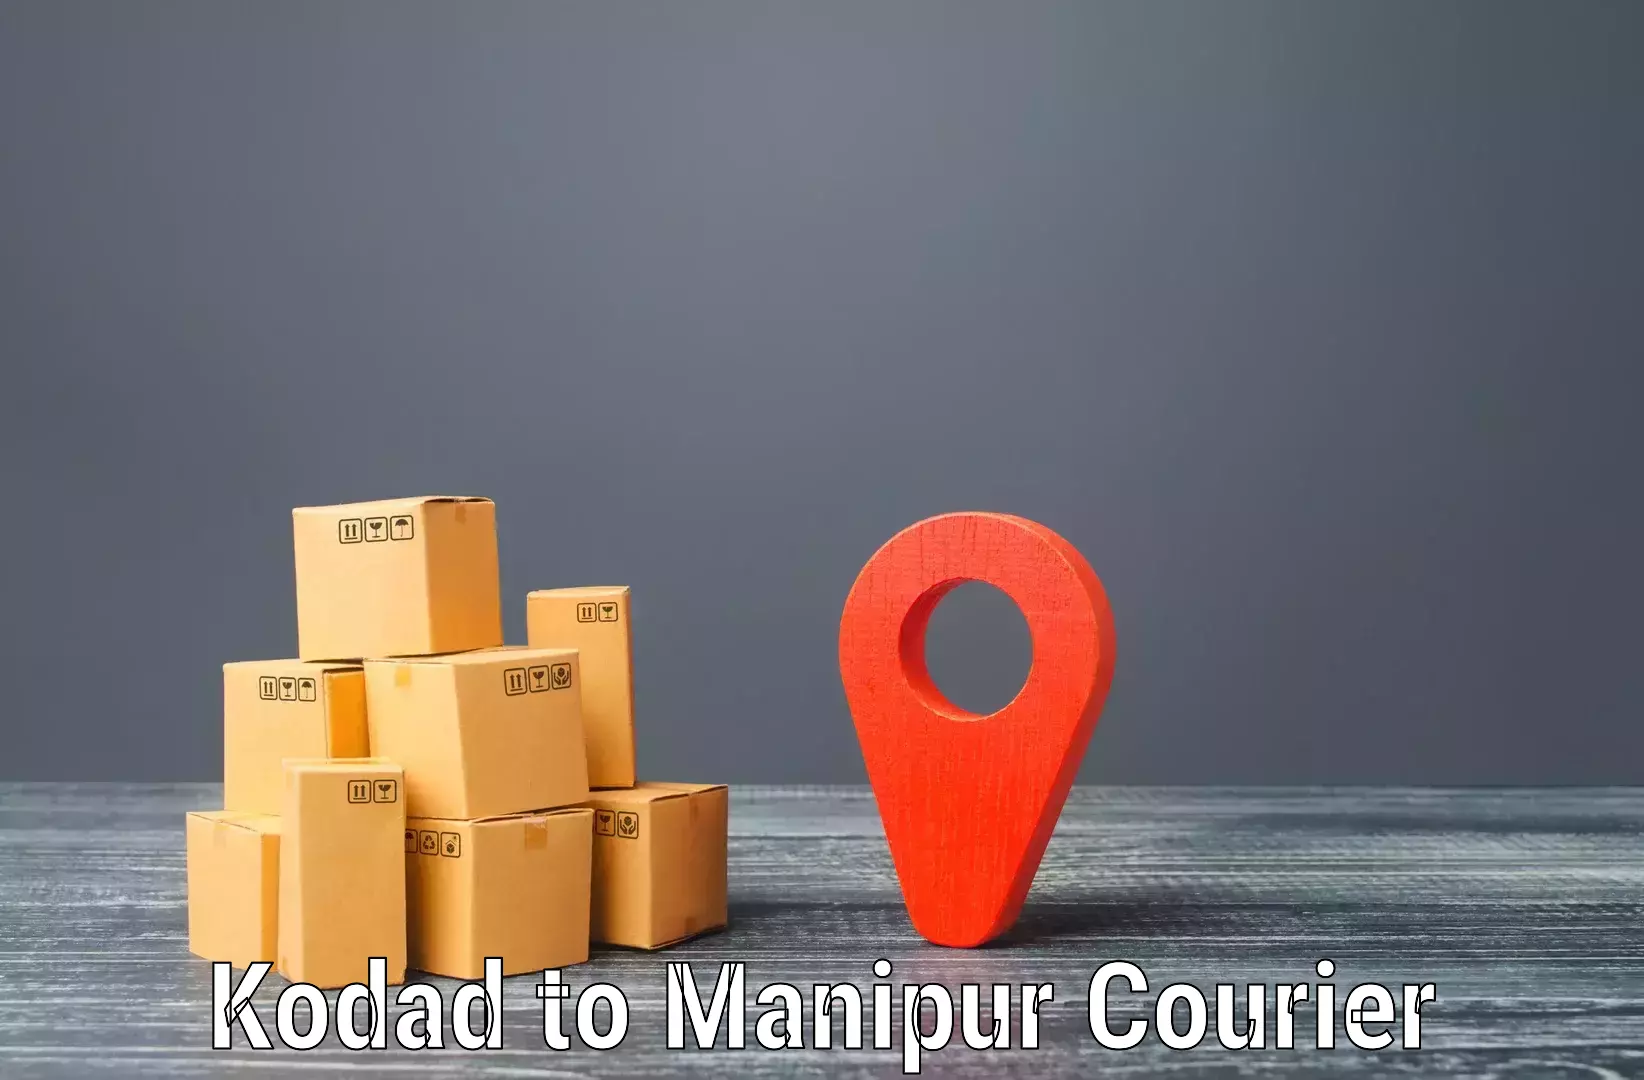 Nationwide delivery network Kodad to Manipur